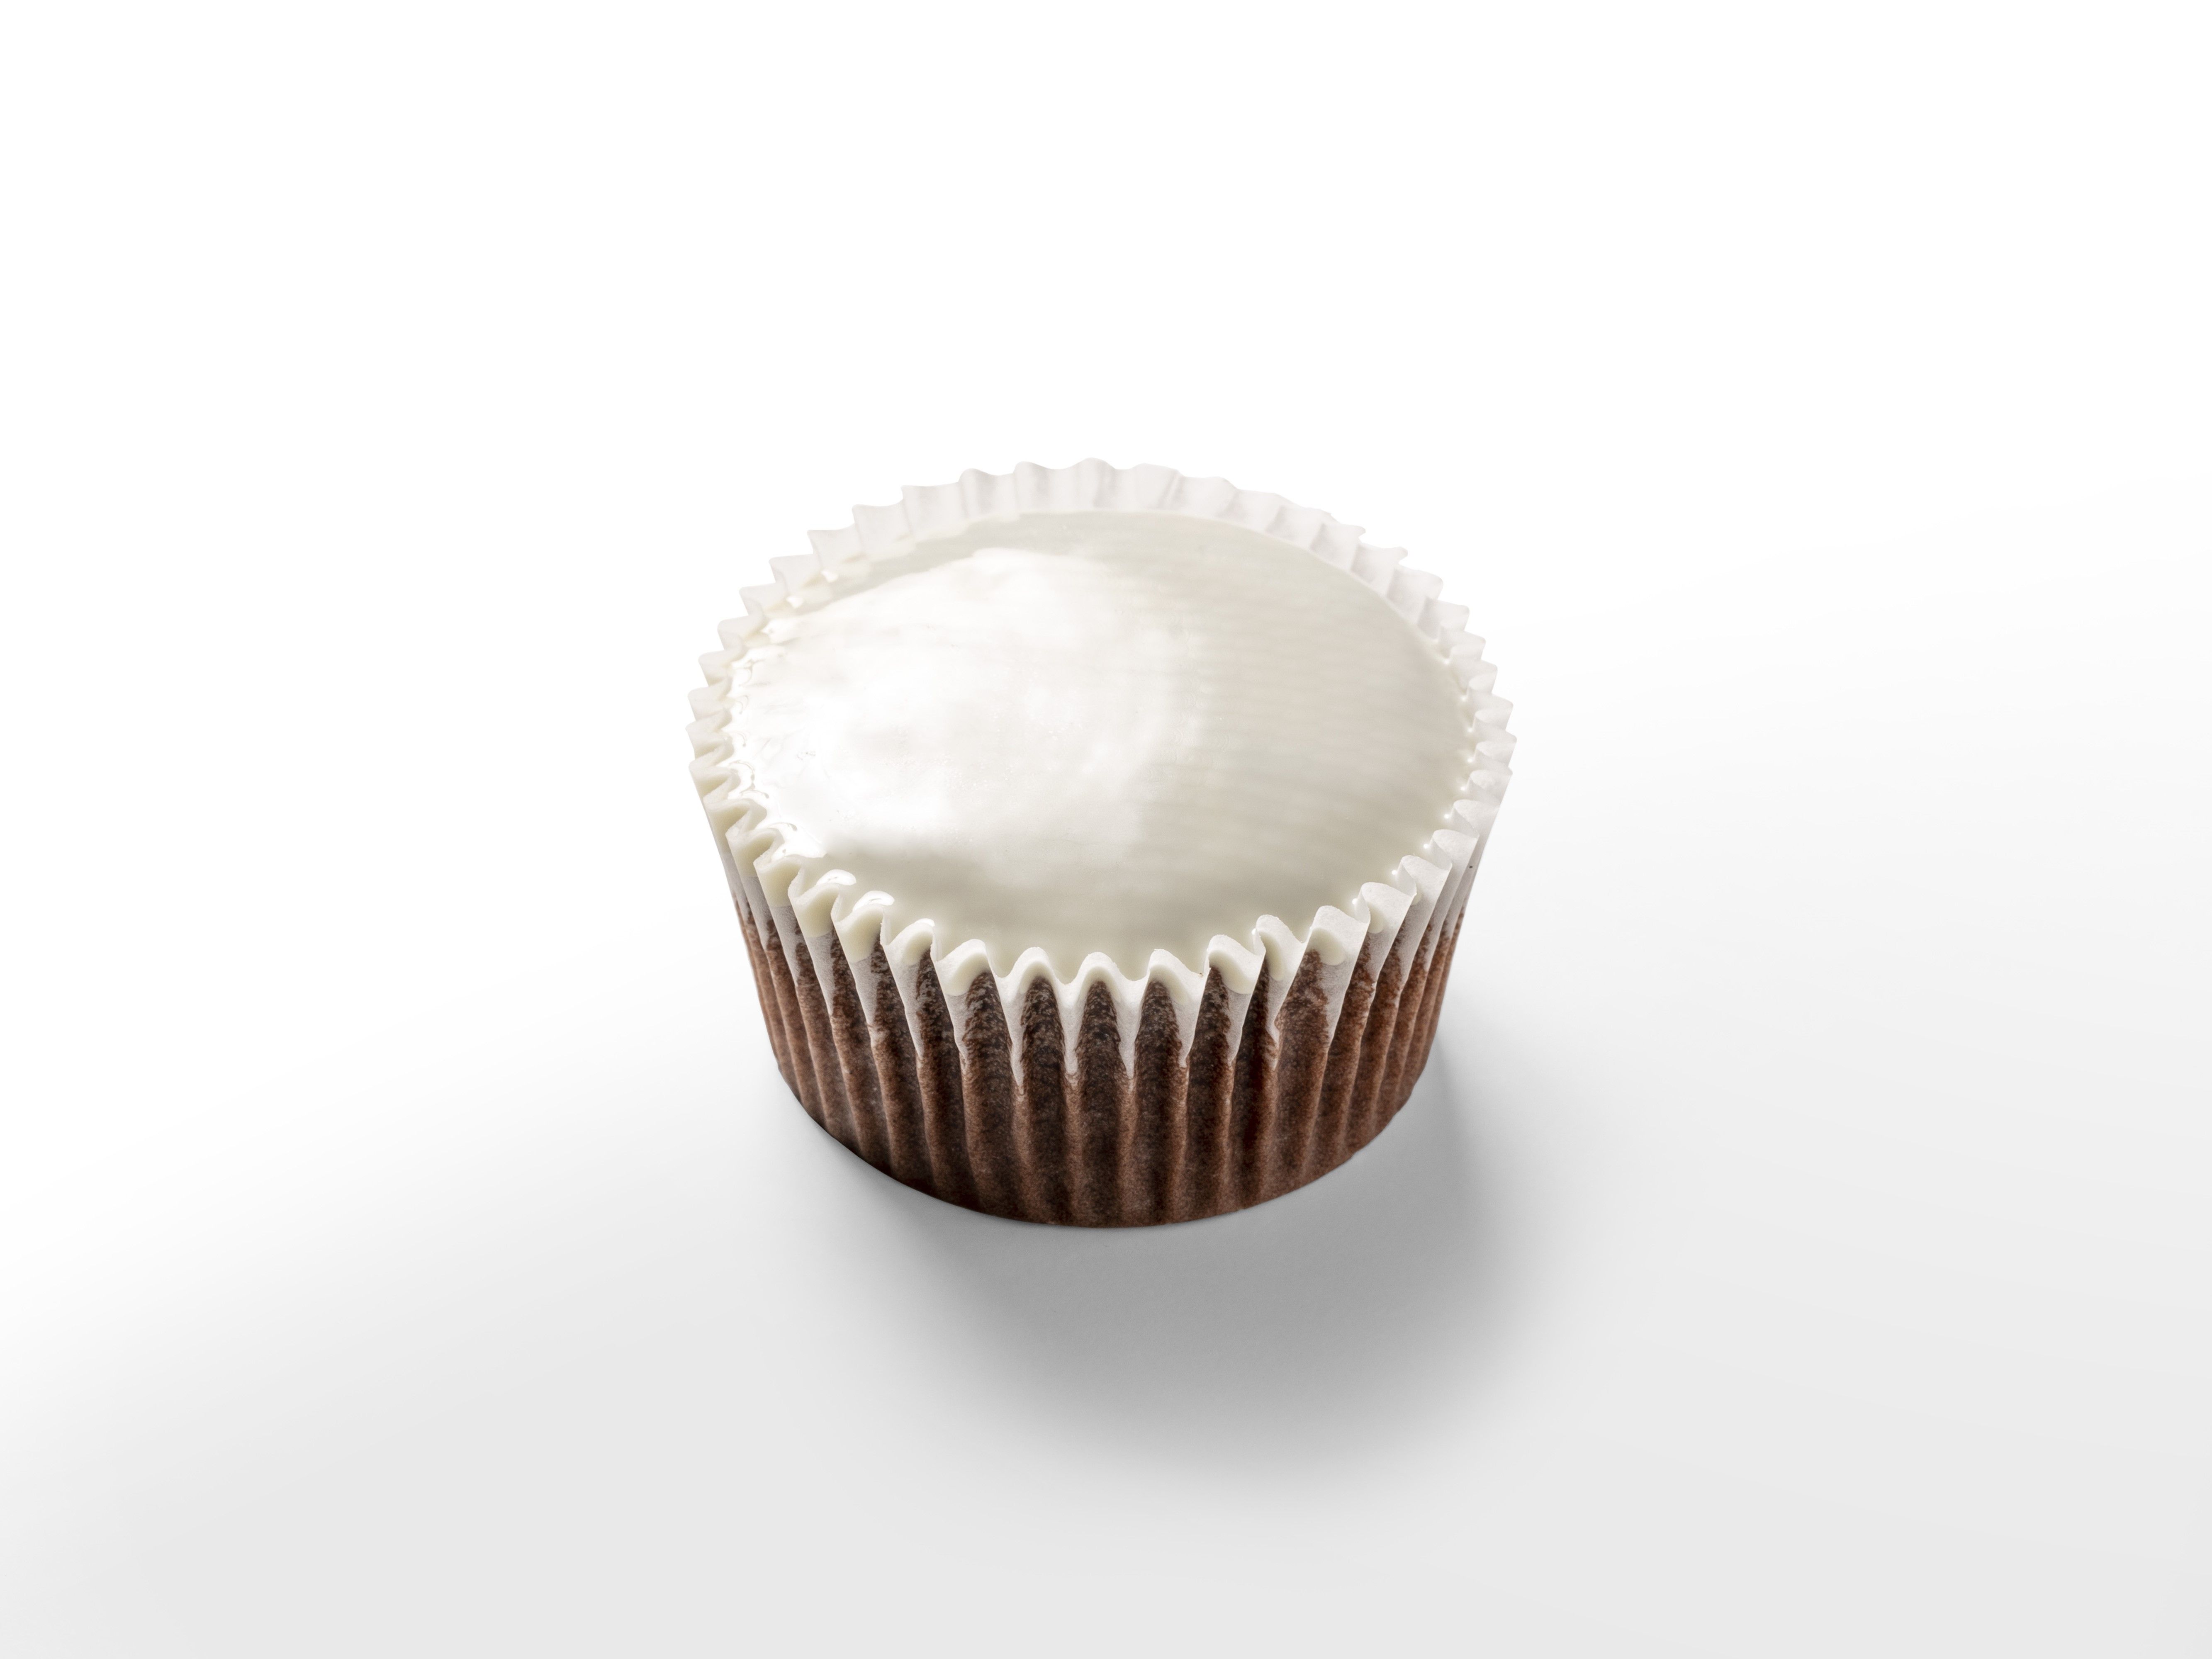 Cupcake topped with white chocolate